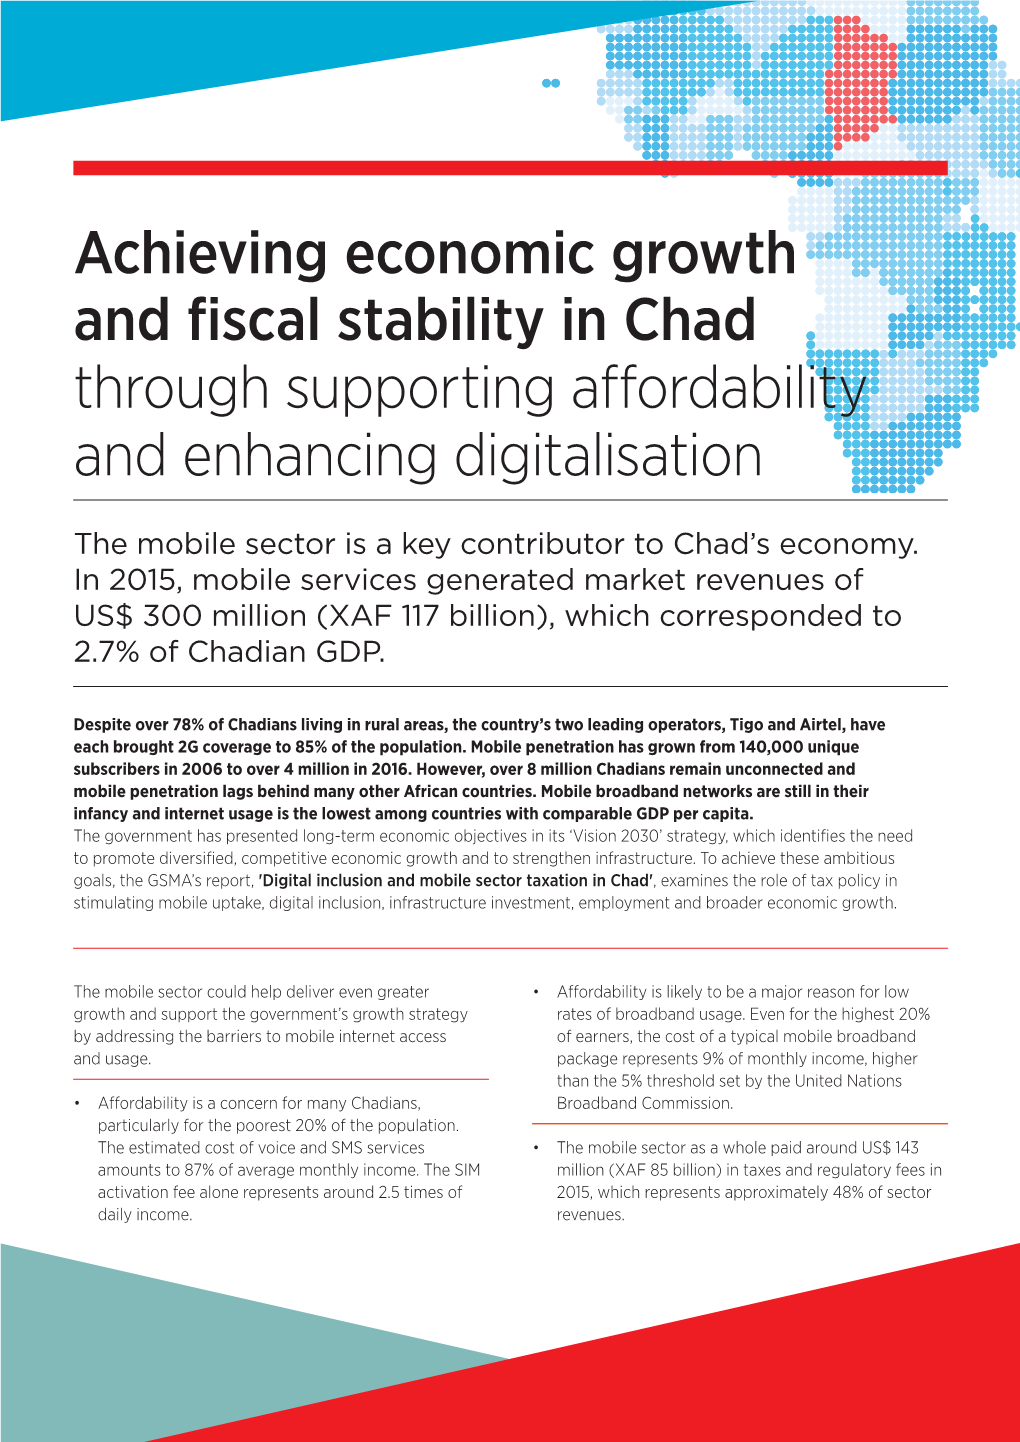 Achieving Economic Growth and Fiscal Stability in Chad